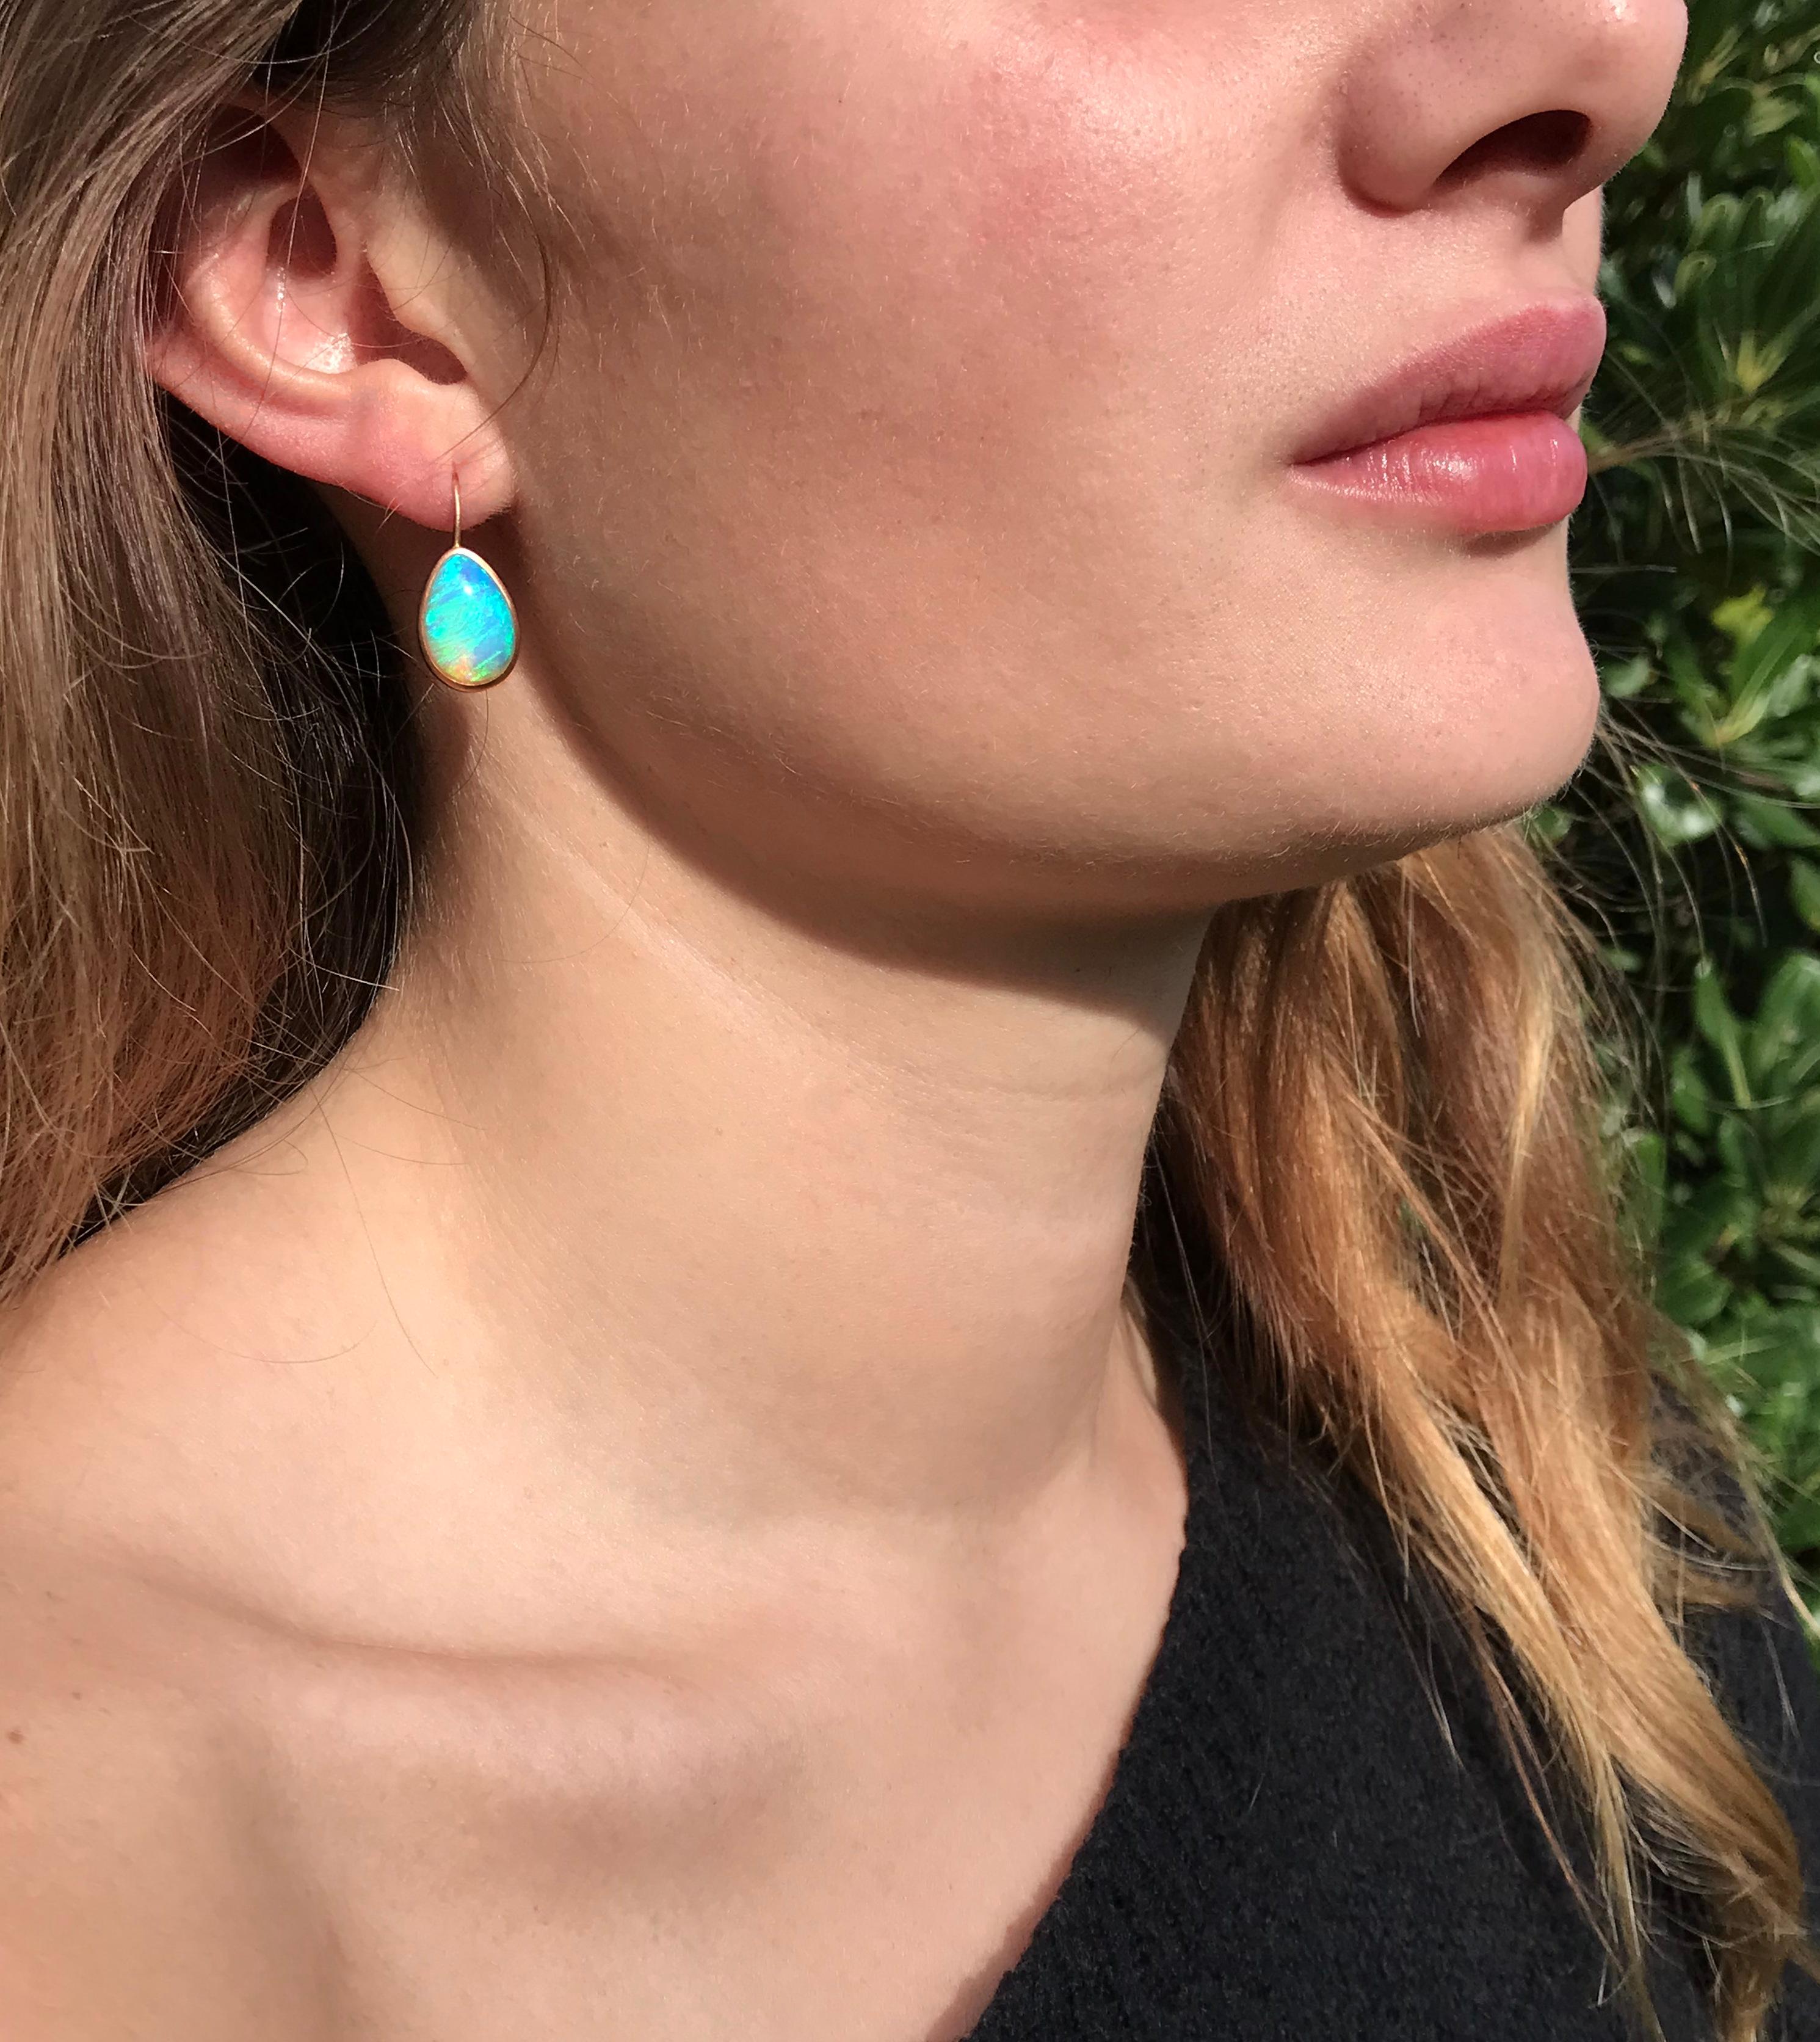 Dalben design  18k rose gold matte finishing small earrings with two bezel-set oval cabochon blue Australian solid opals weight 6,53 carats . 
Bezel stone dimensions :
width 10,6 mm
height without leverback 15 mm
height with leverback 23 mm
The